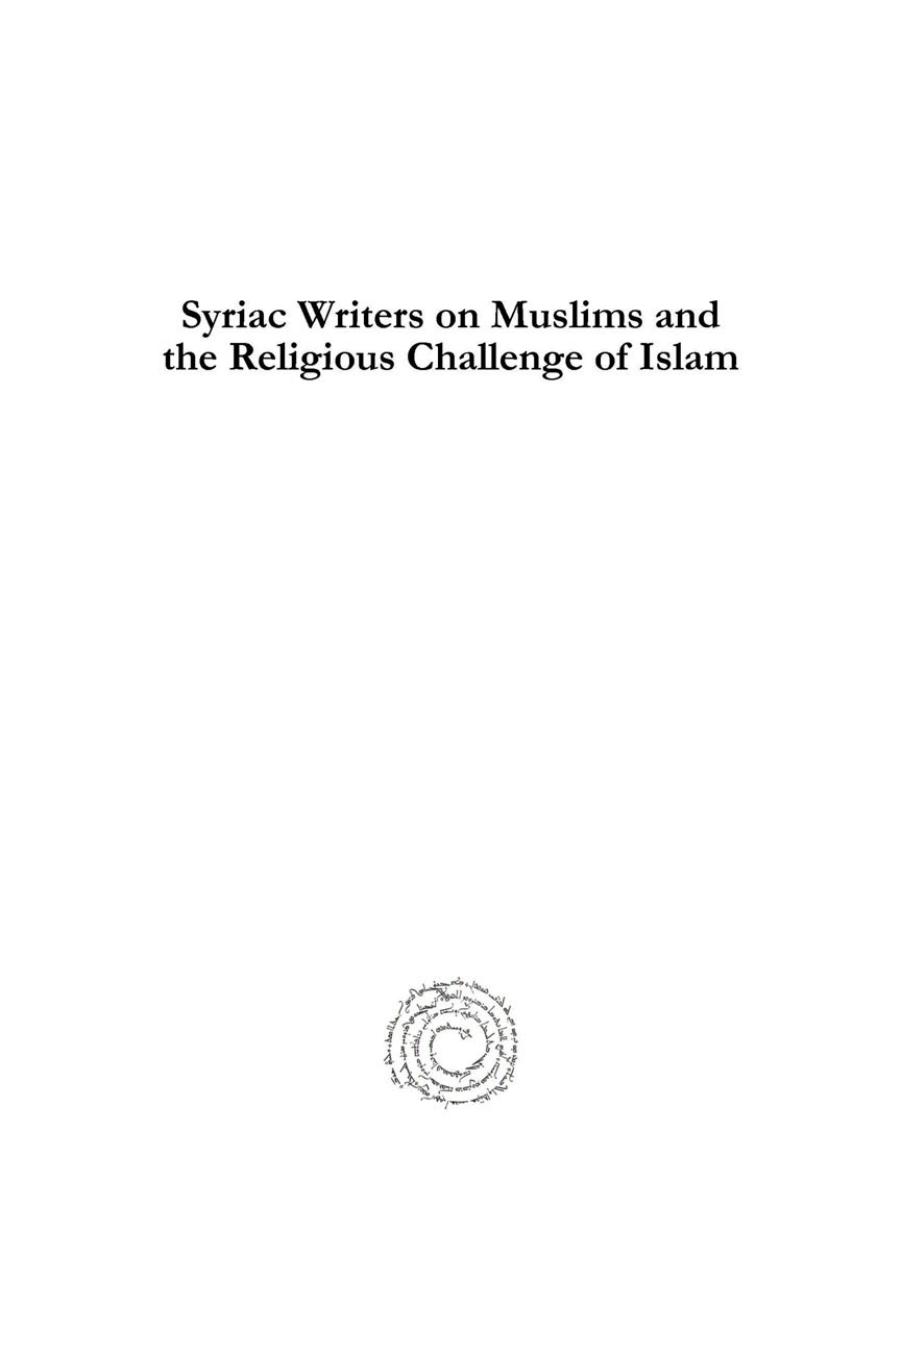 Syriac Writers on Muslims and the Religious Challenge of Islam by Sidney H. Griffith